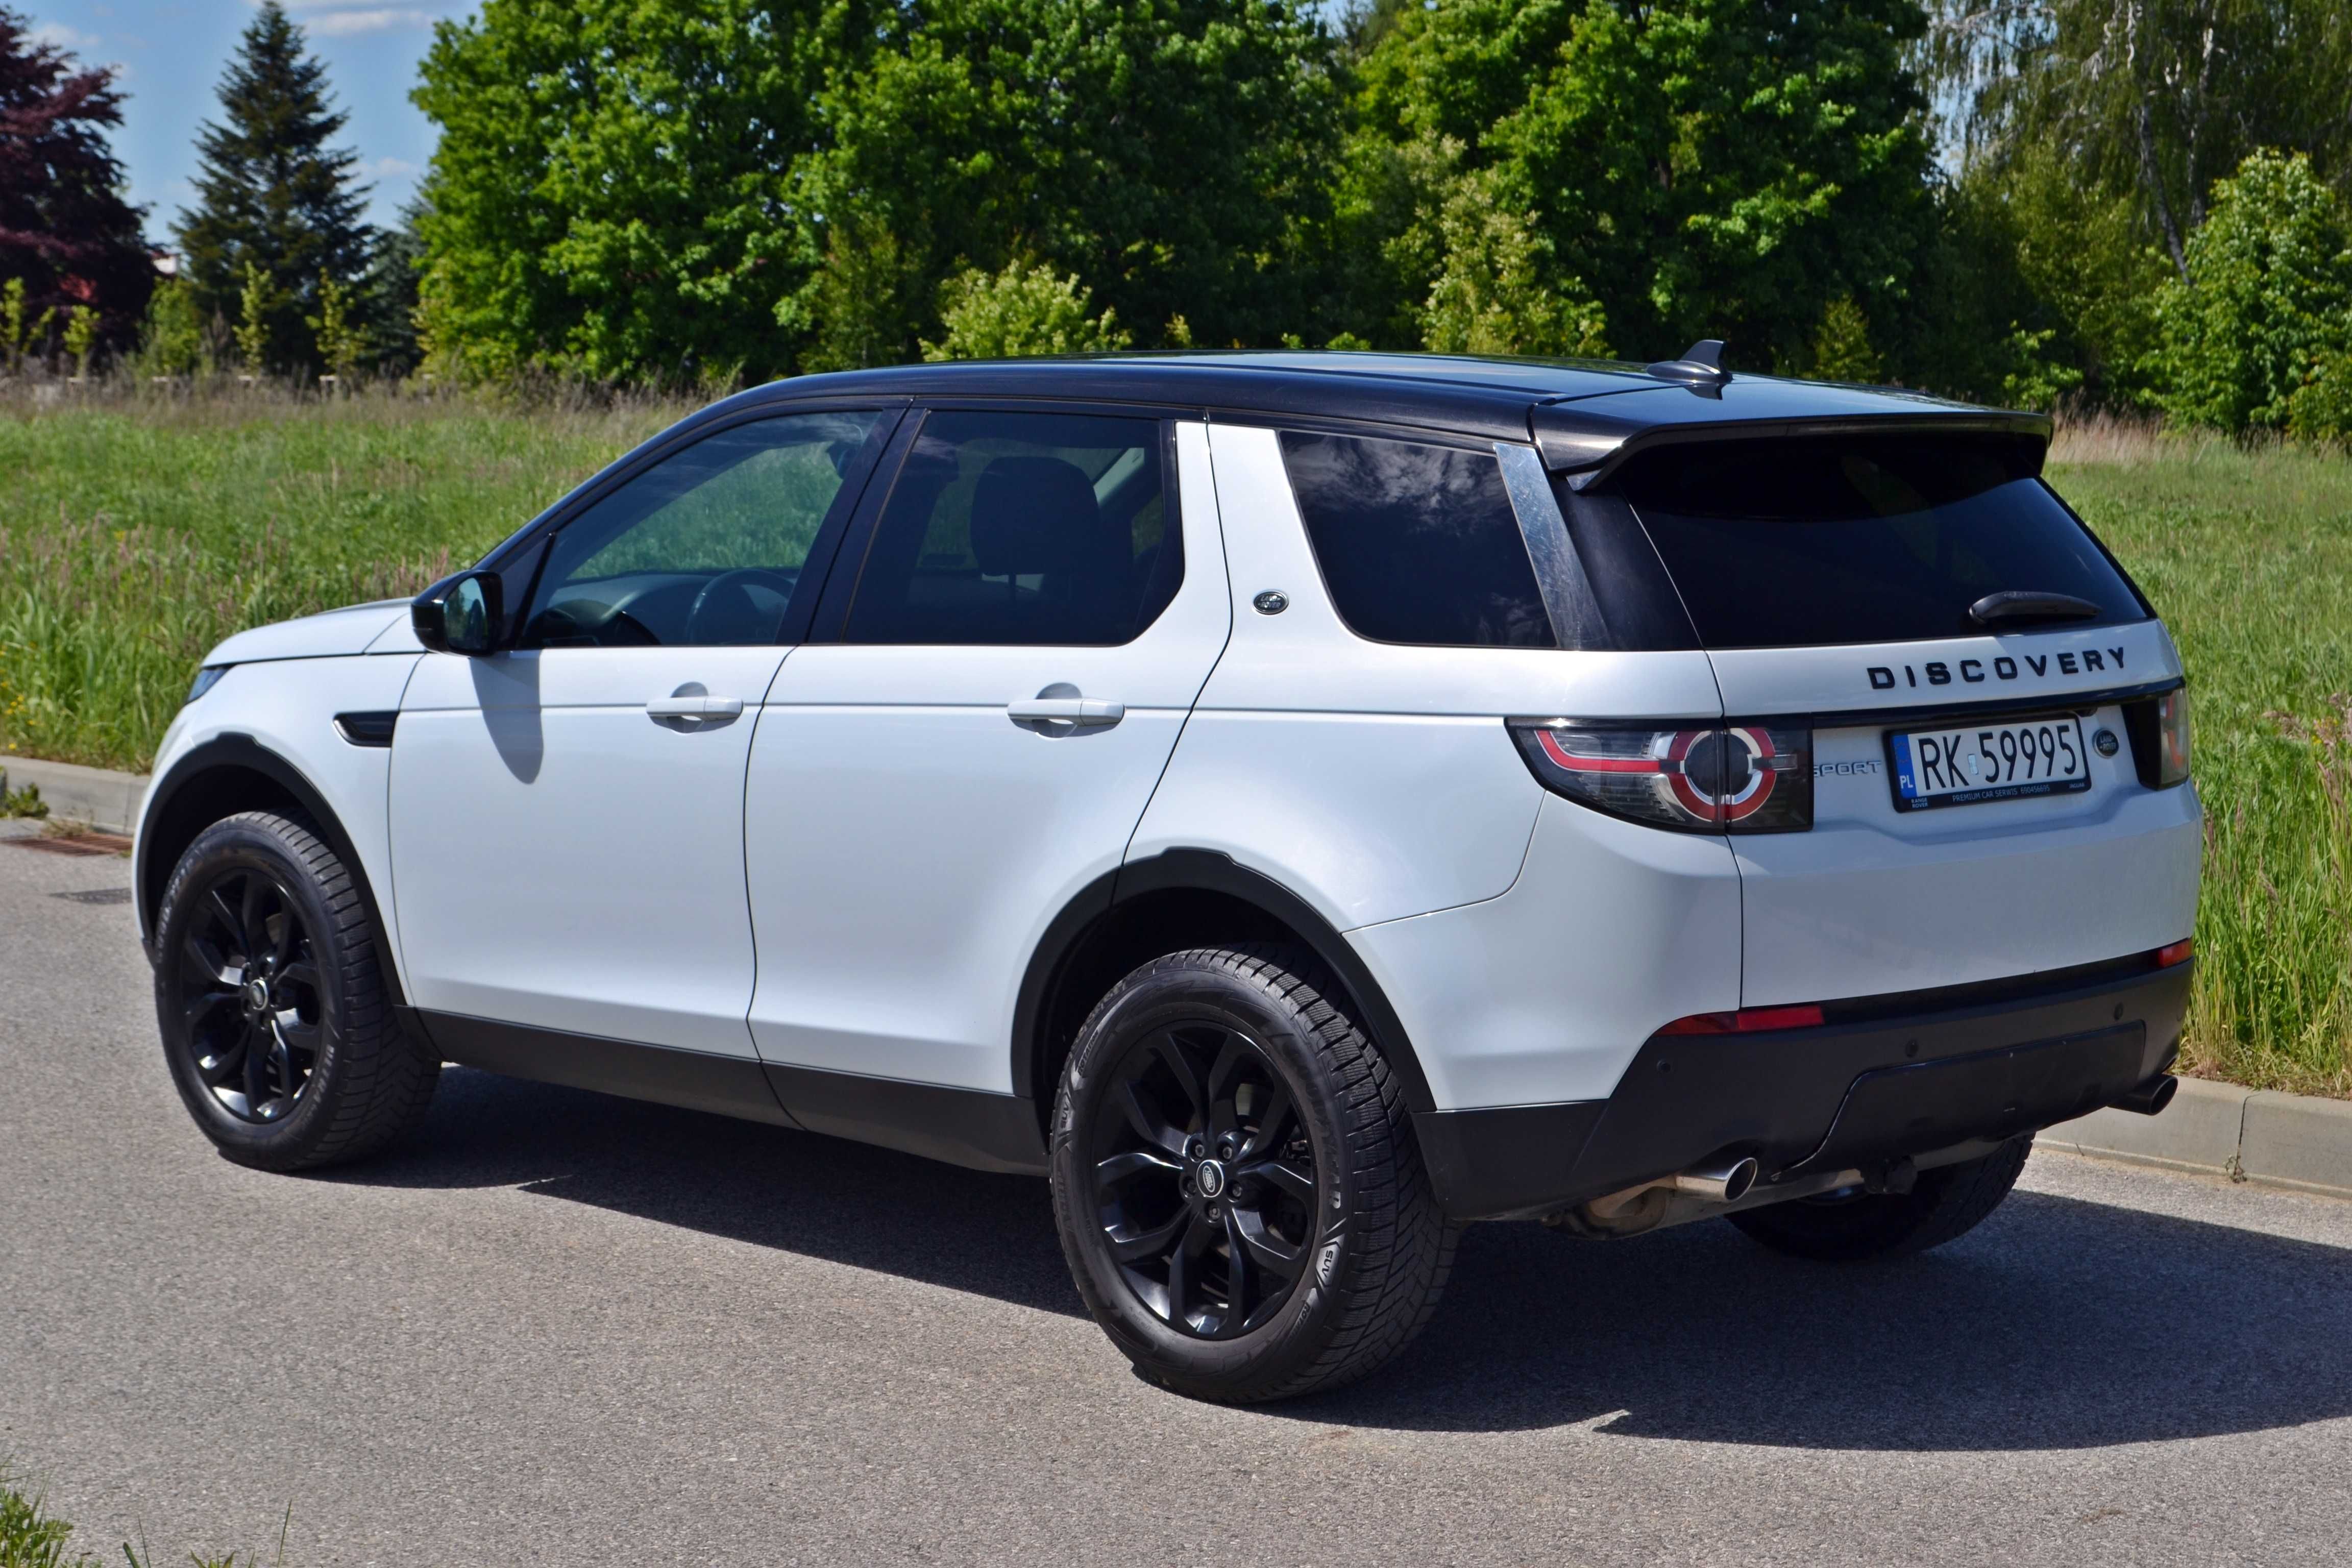 # Land Rover Discovery Sport # 2.0 diesel 150KM# automat # 4x4 #